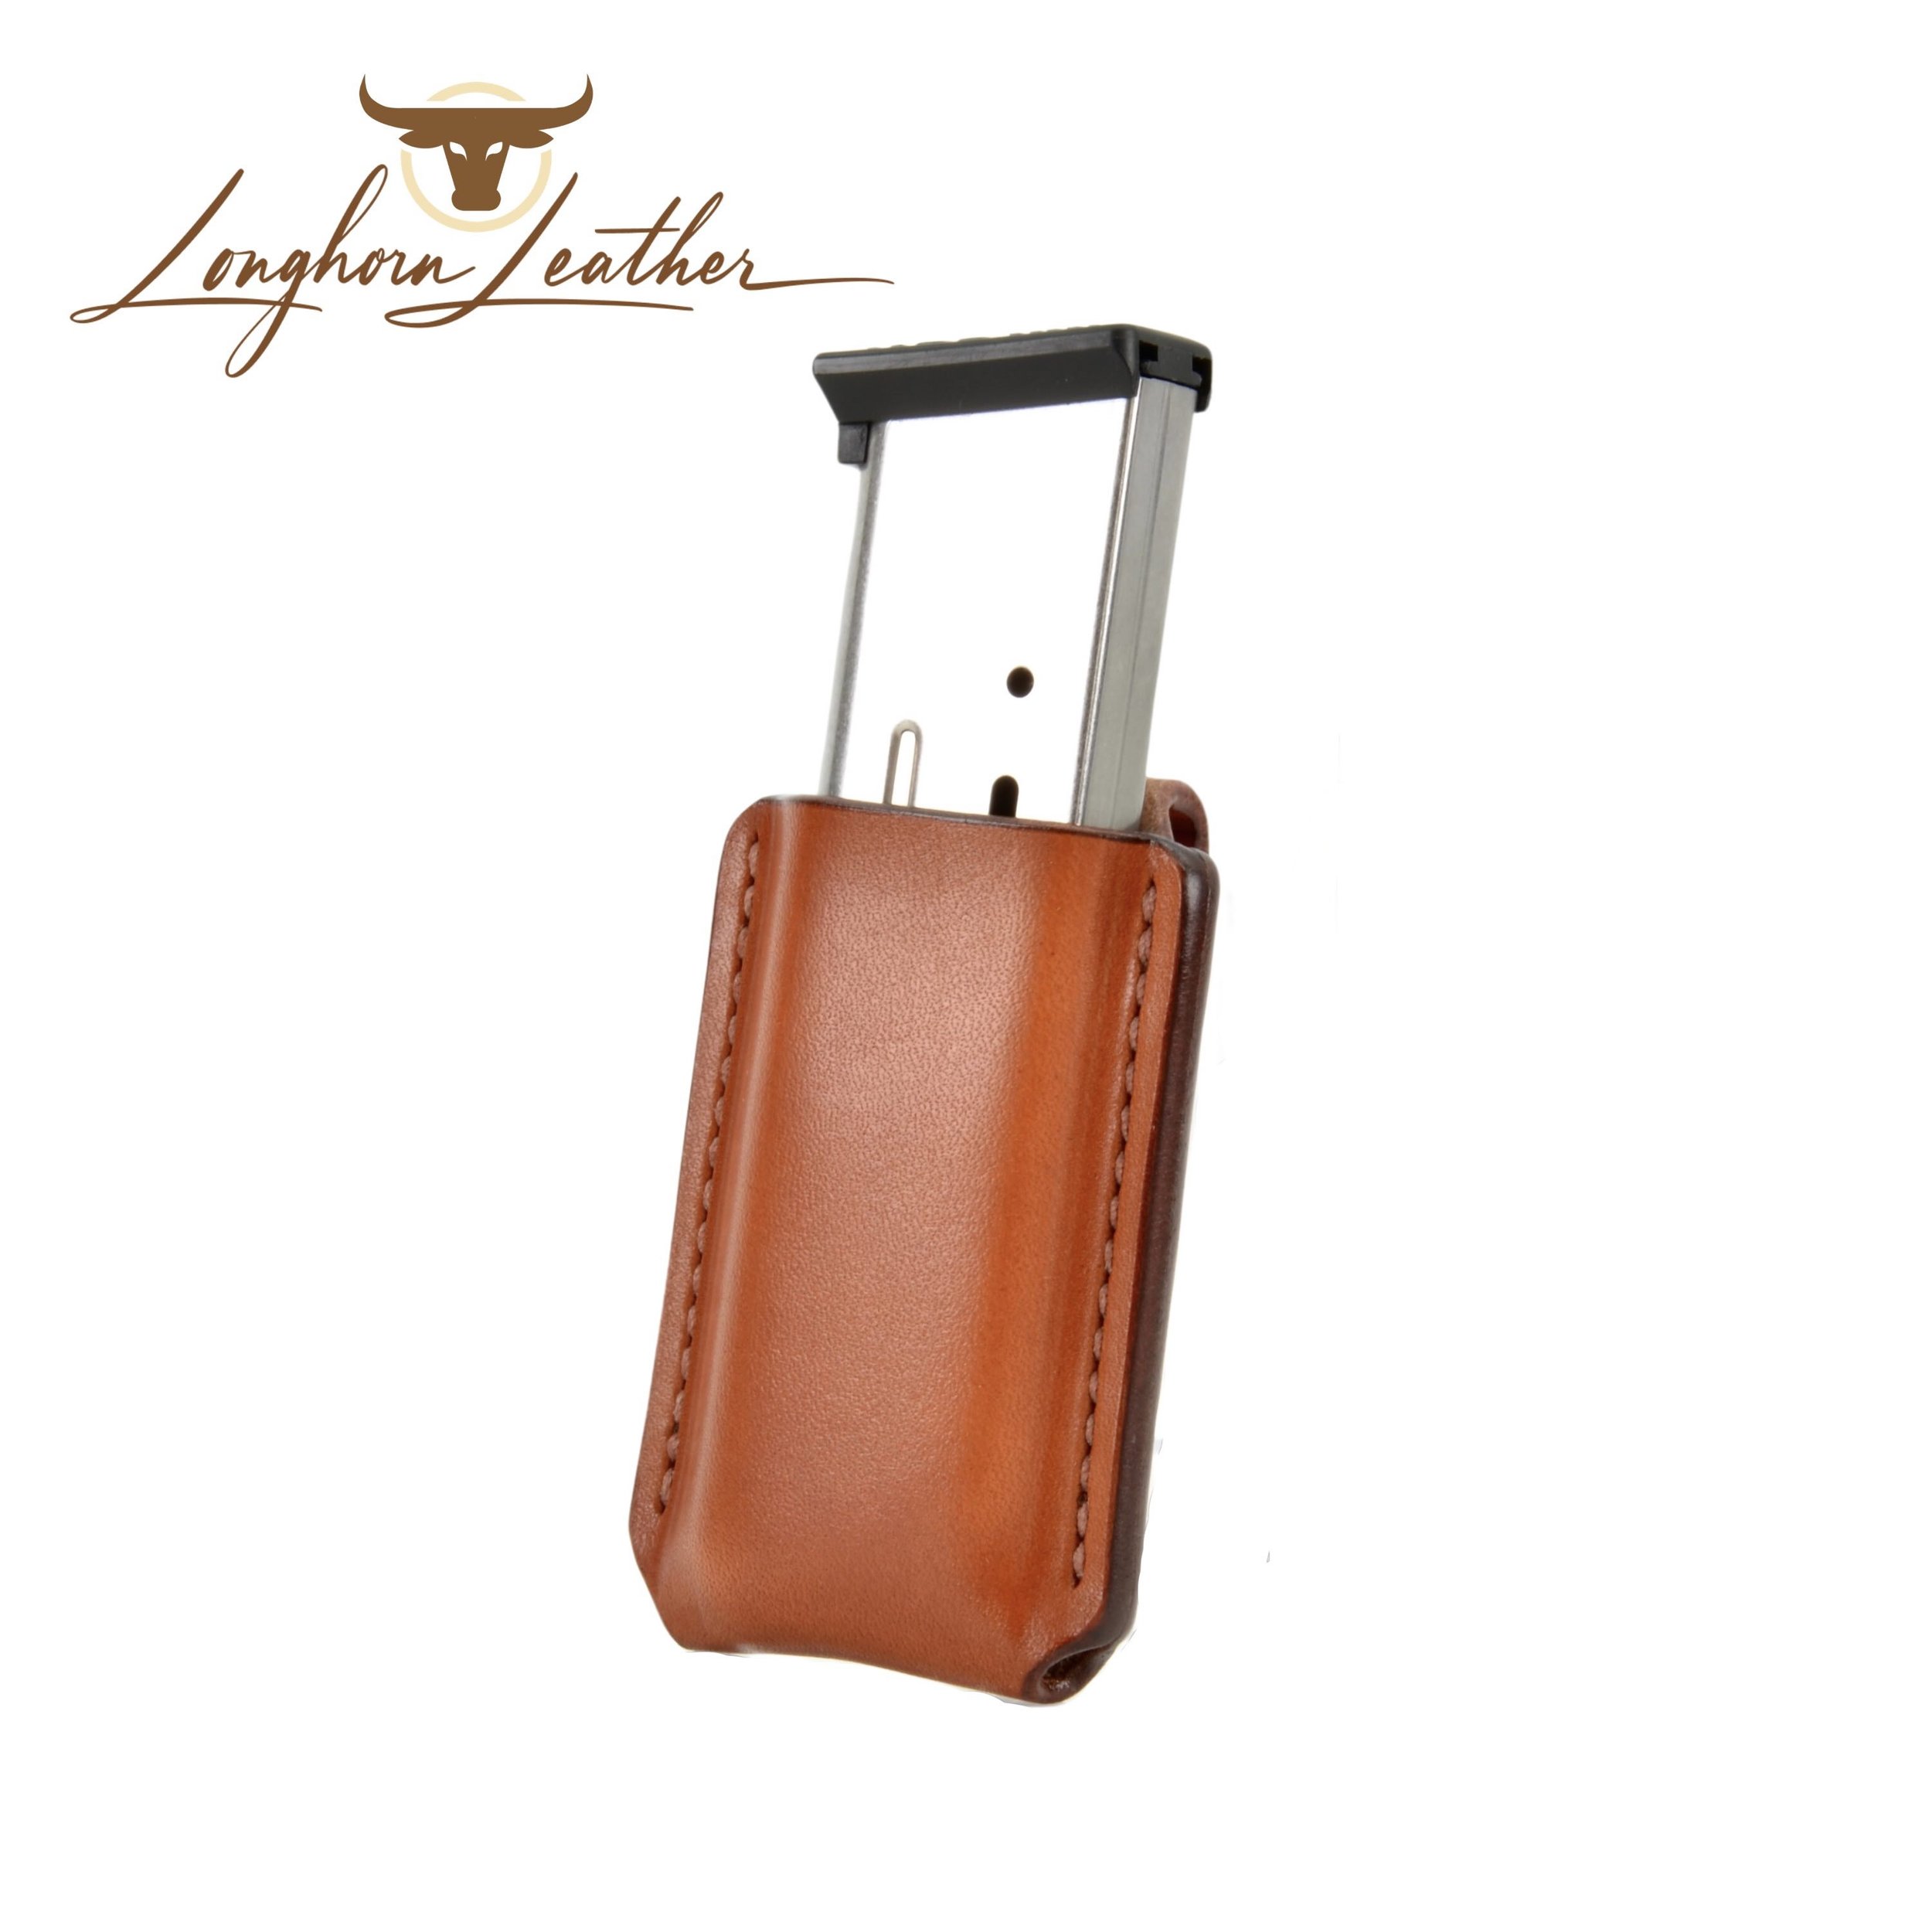 Custom leather 1911 single magazine carrier.  Individually handcrafted at Longhorn Leather AZ